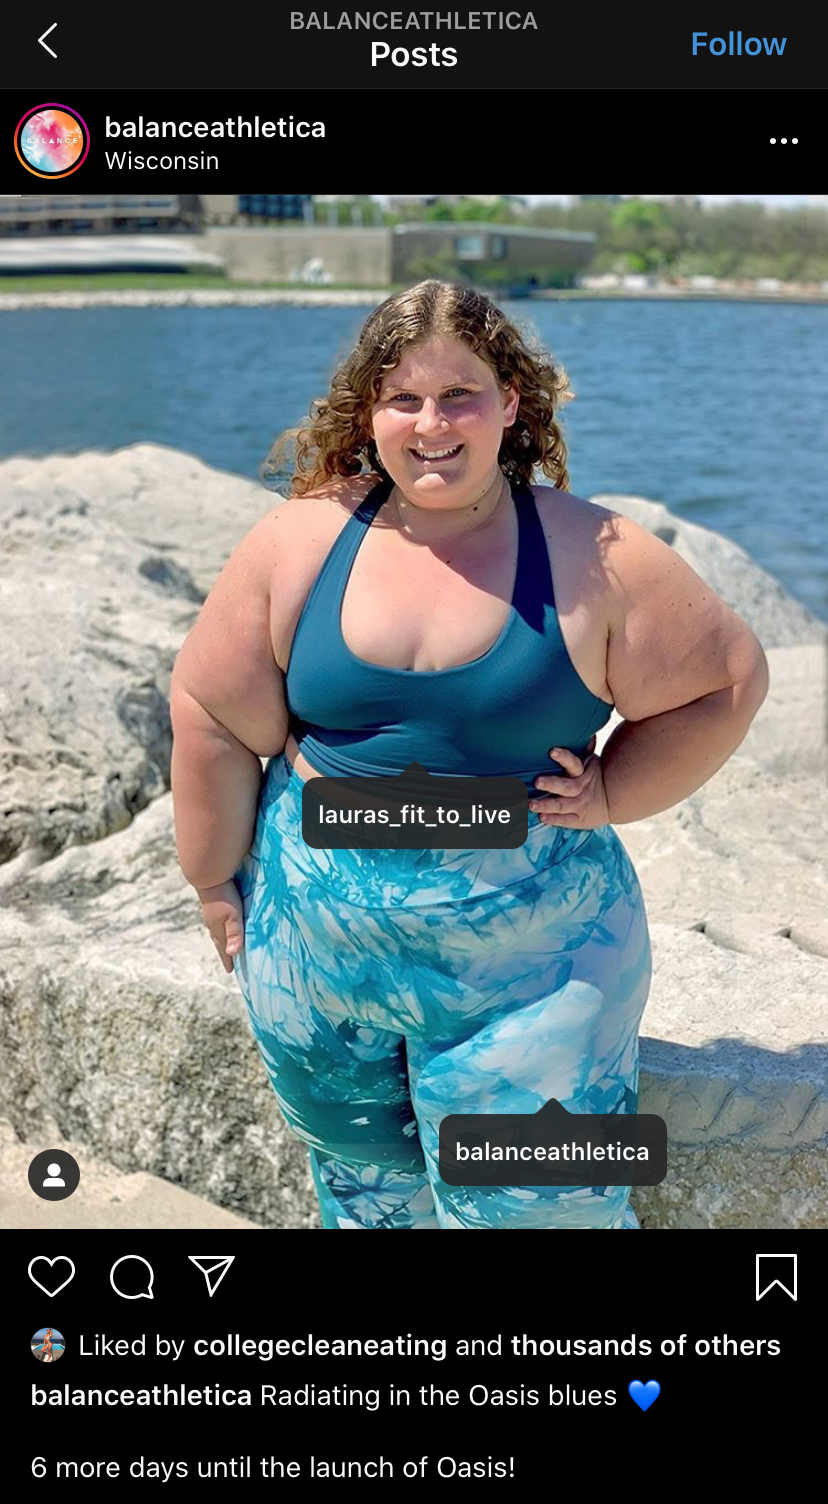 Balance Athetica uses influencers to showcase all body types